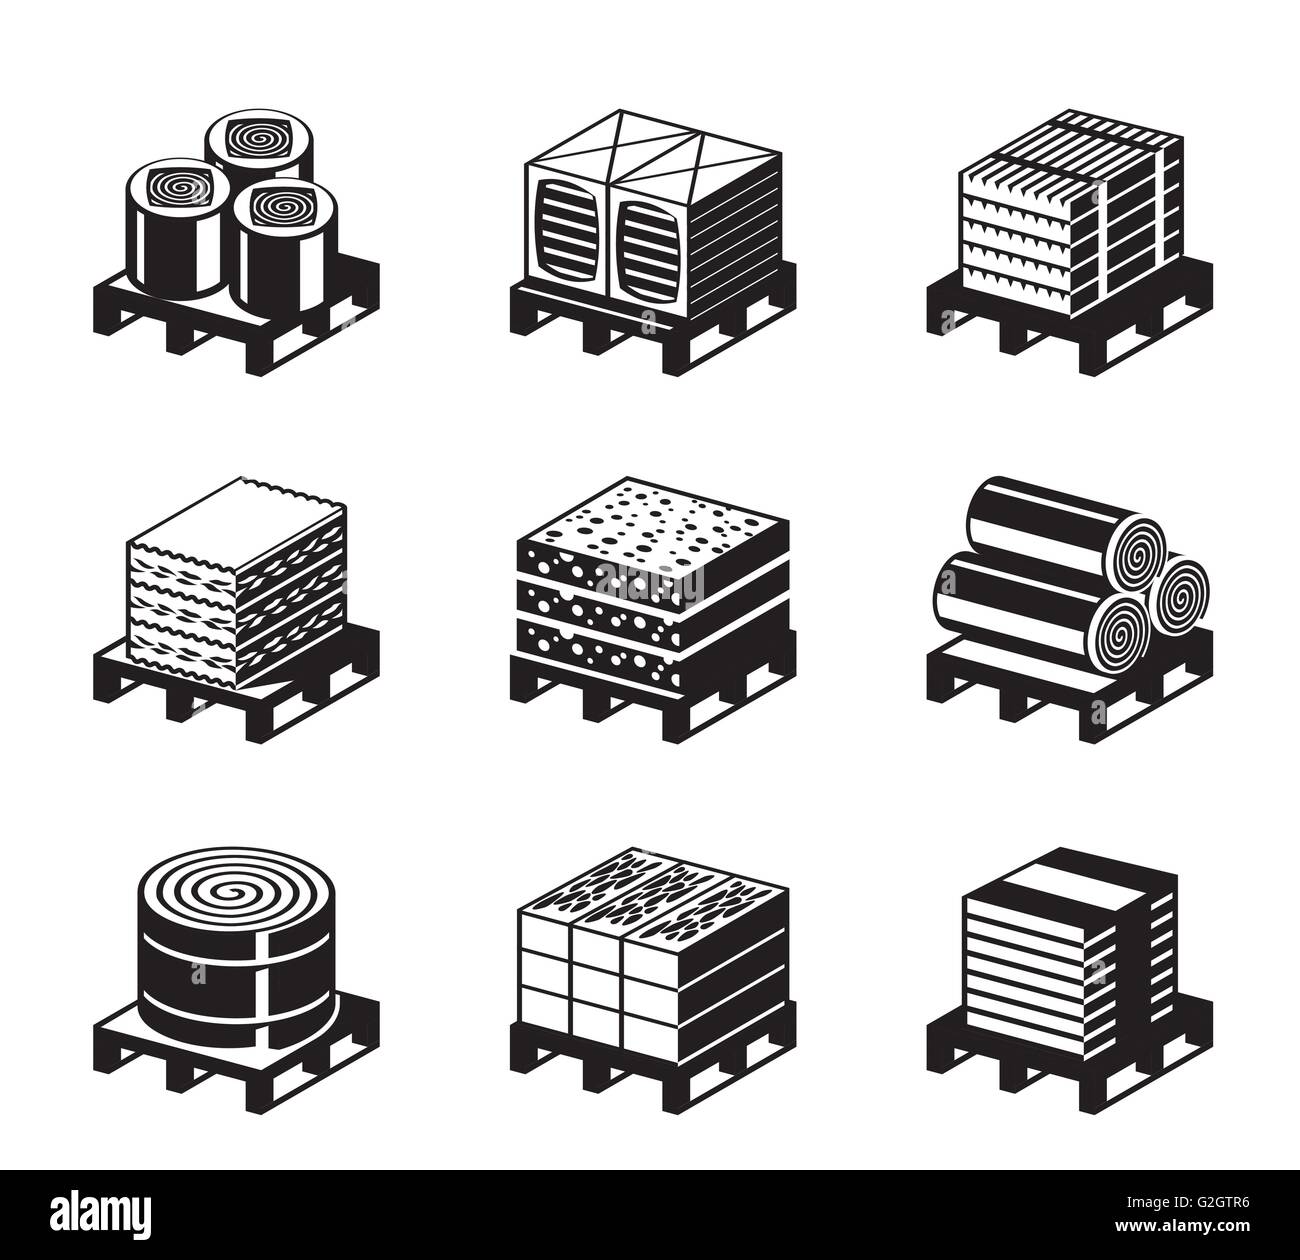 Different types of building insulation - vector illustration Stock Vector